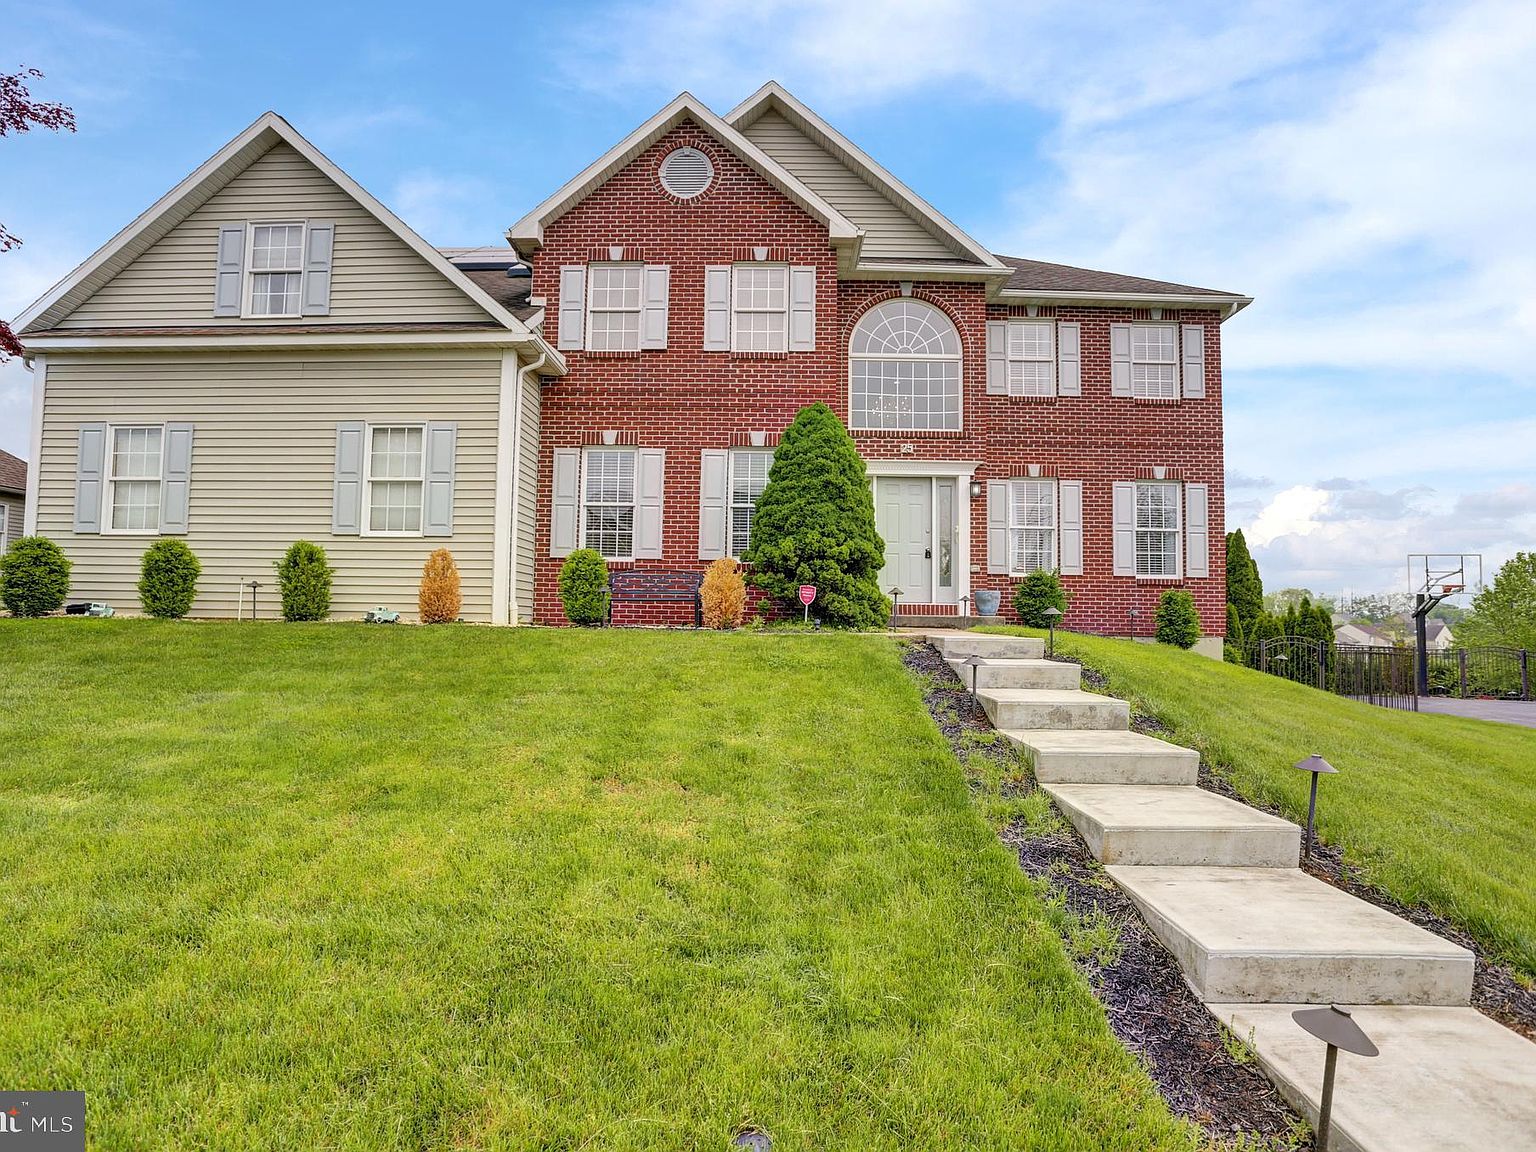 Zillow Ave, Sinking 25 19608 Spring, PA Fairwood |